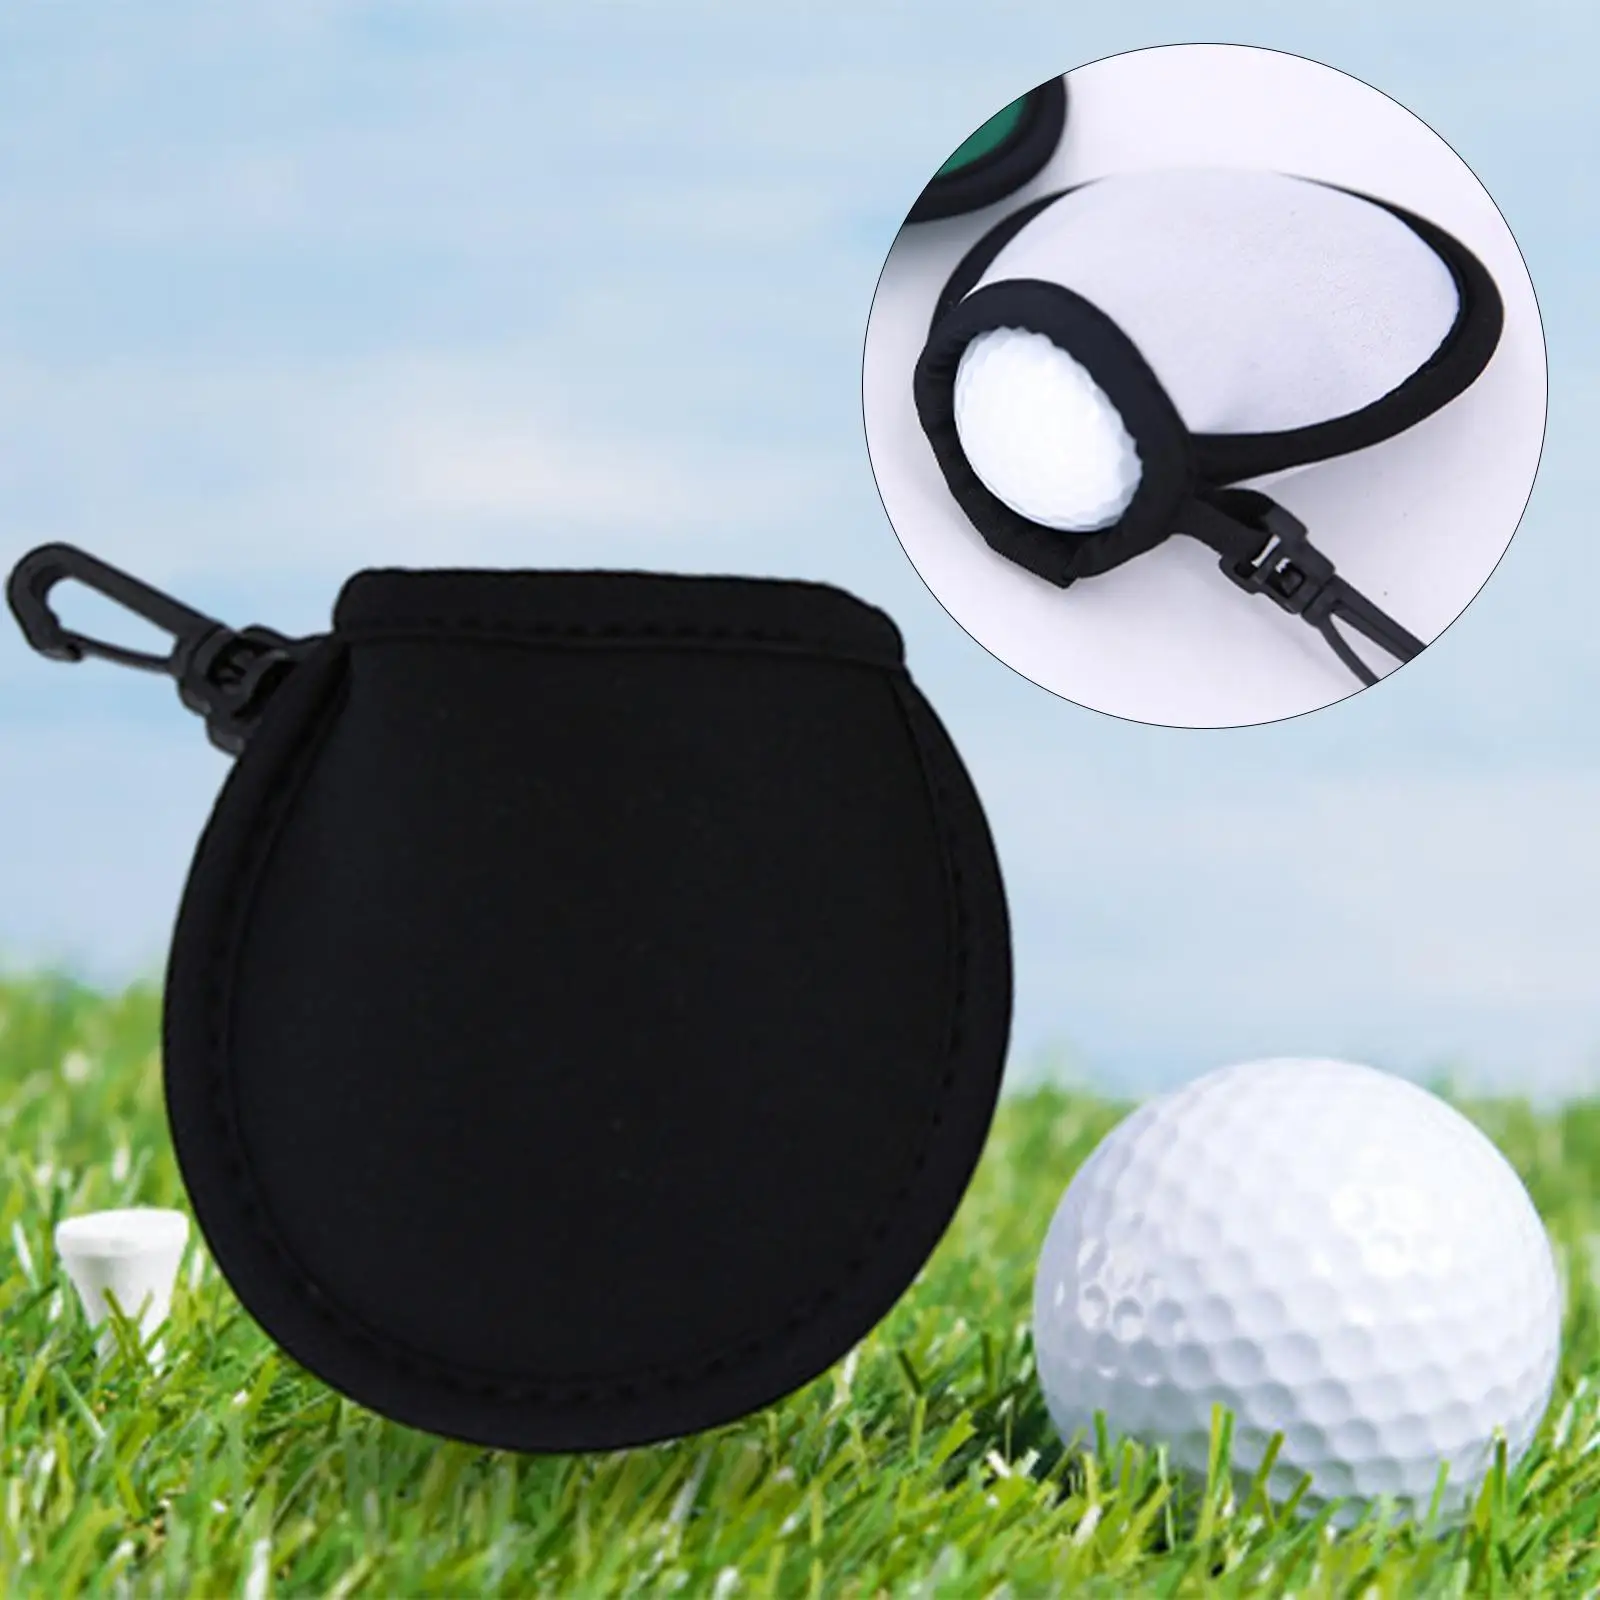 2X Golf Ball Cleaner Washer Quickly Drying for Cleaning Golf Ball Scrubbing